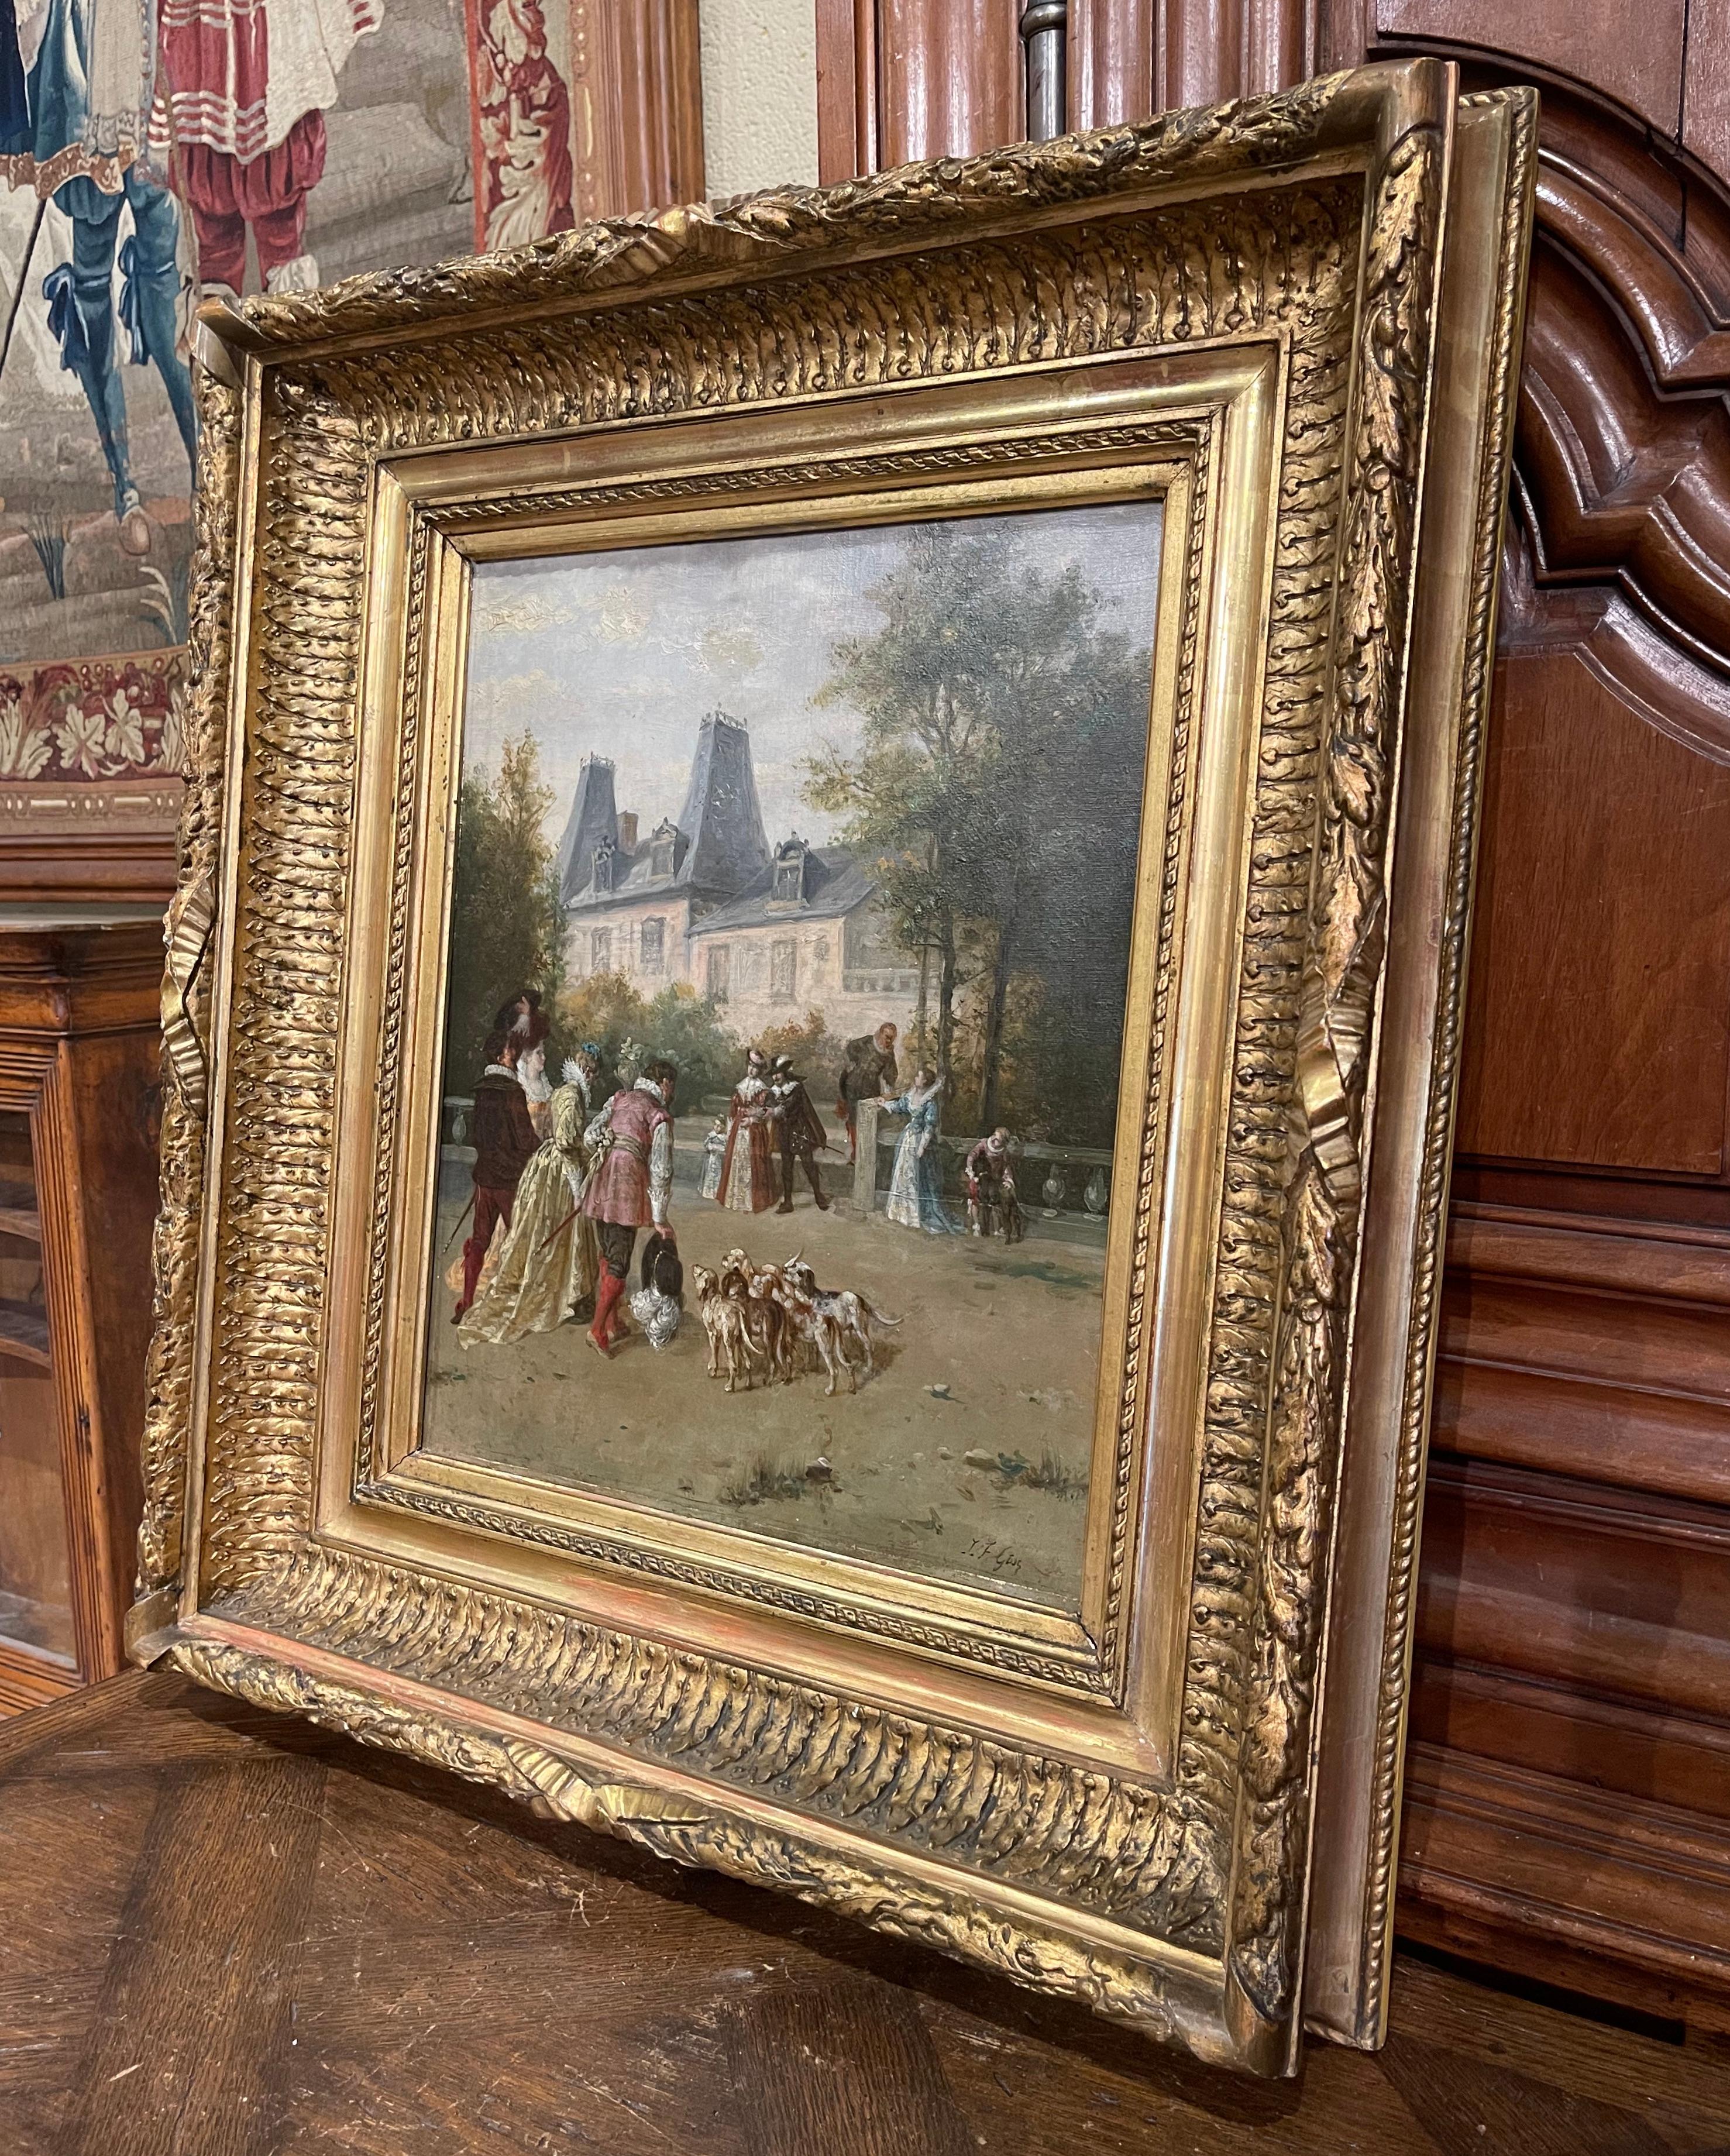 Created in France circa 1860 and set in the original carved gilt frame, the hand painted canvas depicts an outdoor scene with men and women in formal clothing talking in front of a castle; the scene is further embellished with a herd of dogs